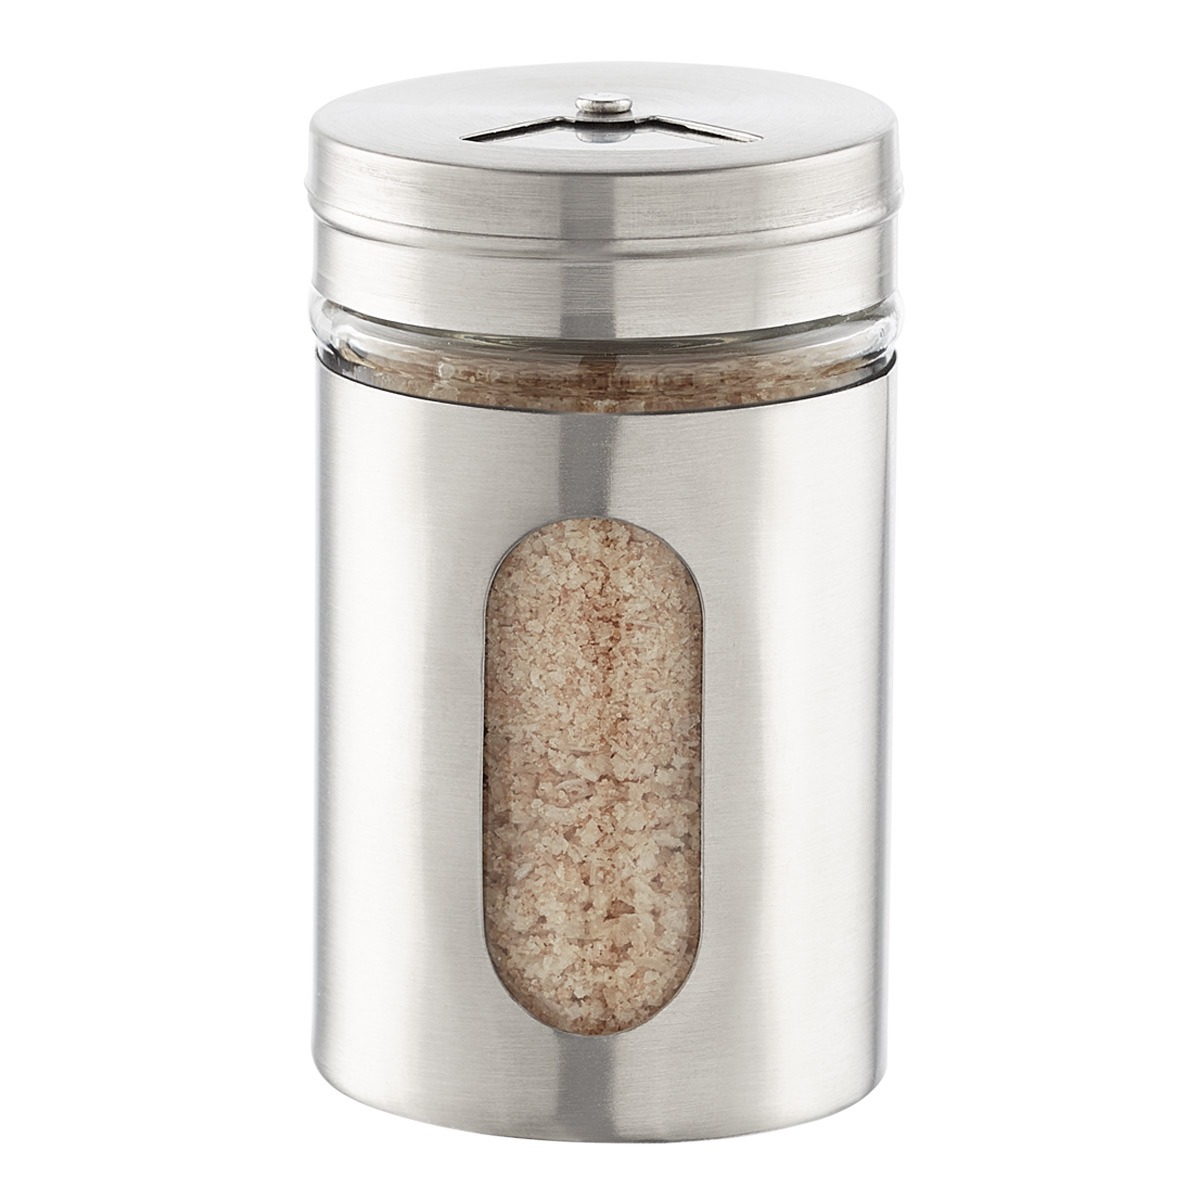 https://www.containerstore.com/catalogimages/433218/10085713_2.7_Oz_Glass_Spice_Jar_With.jpg